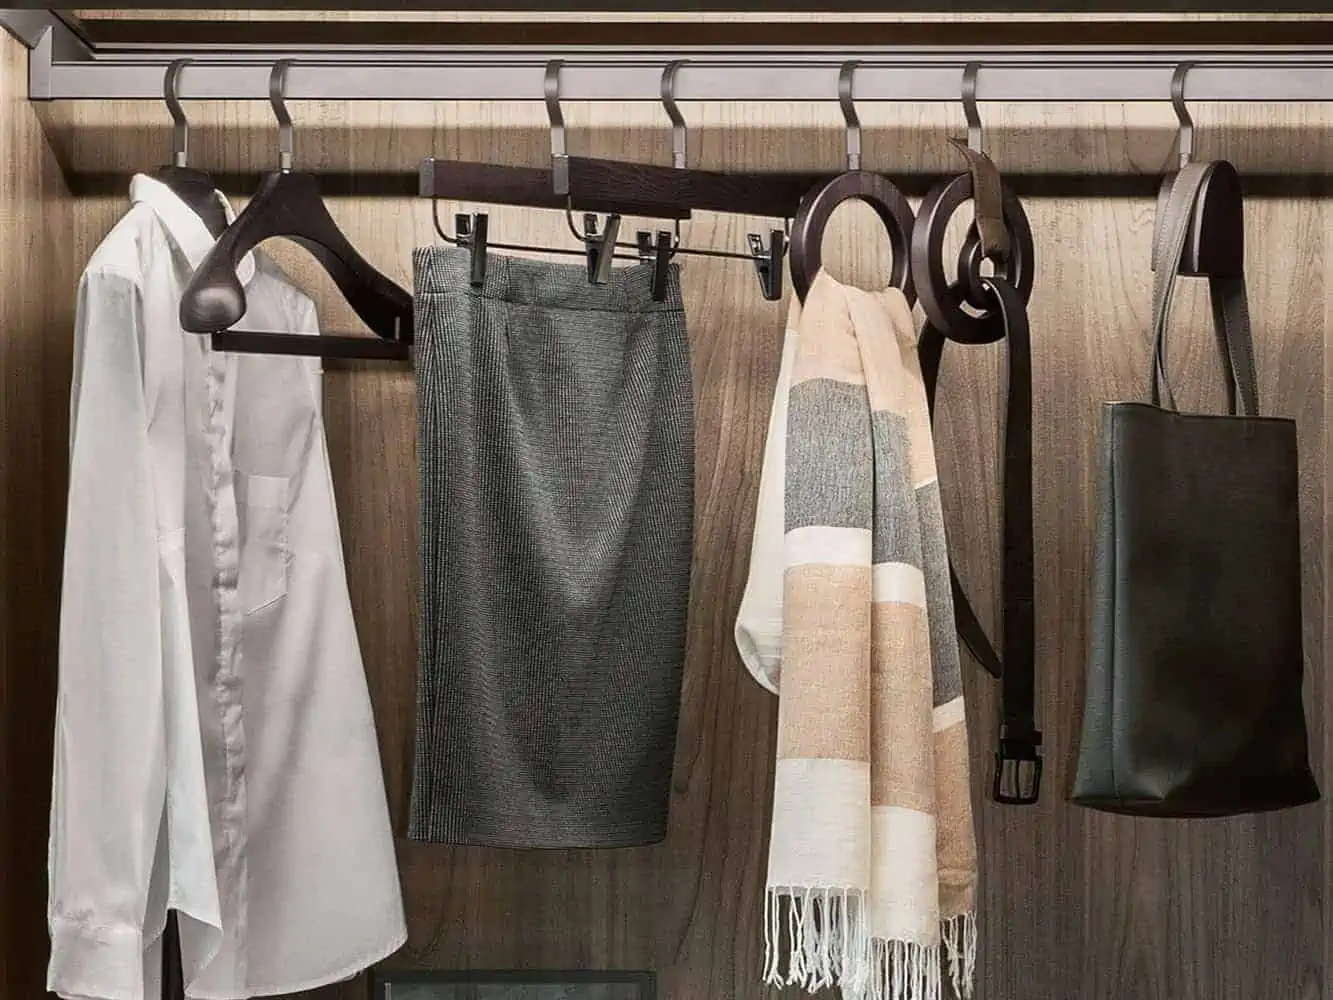 wardrobe hangers in brown colour and different styles